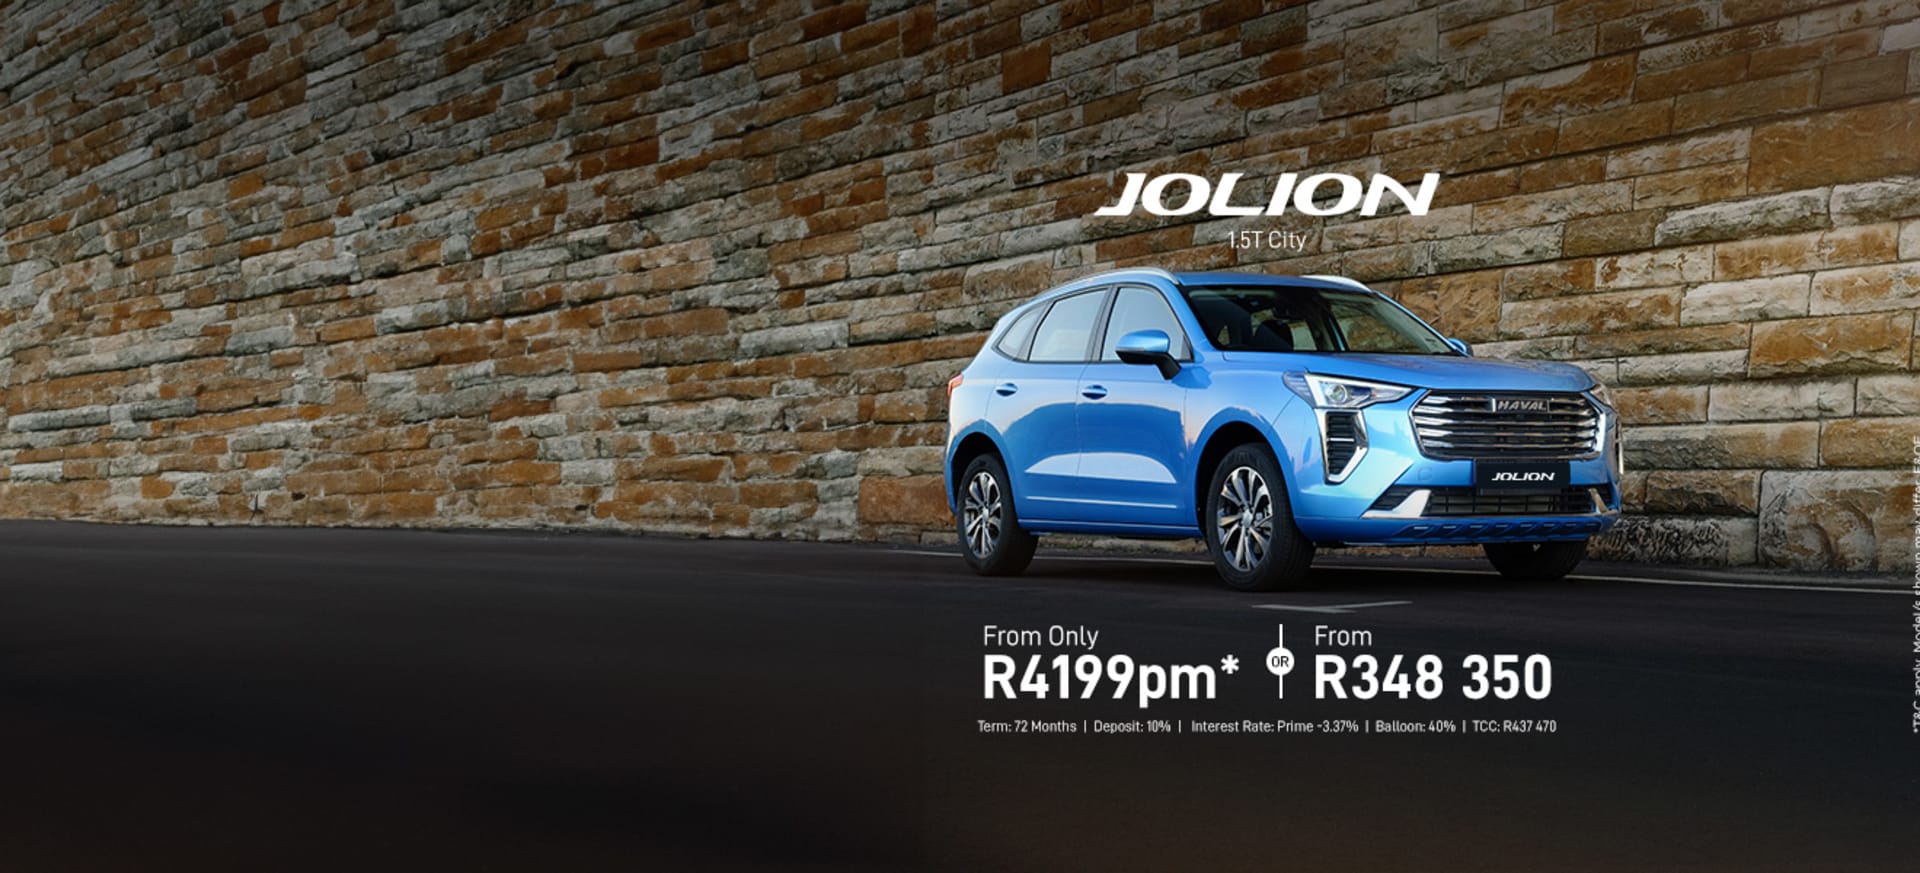 Haval Jolion 1.5T City From R4 199pm*